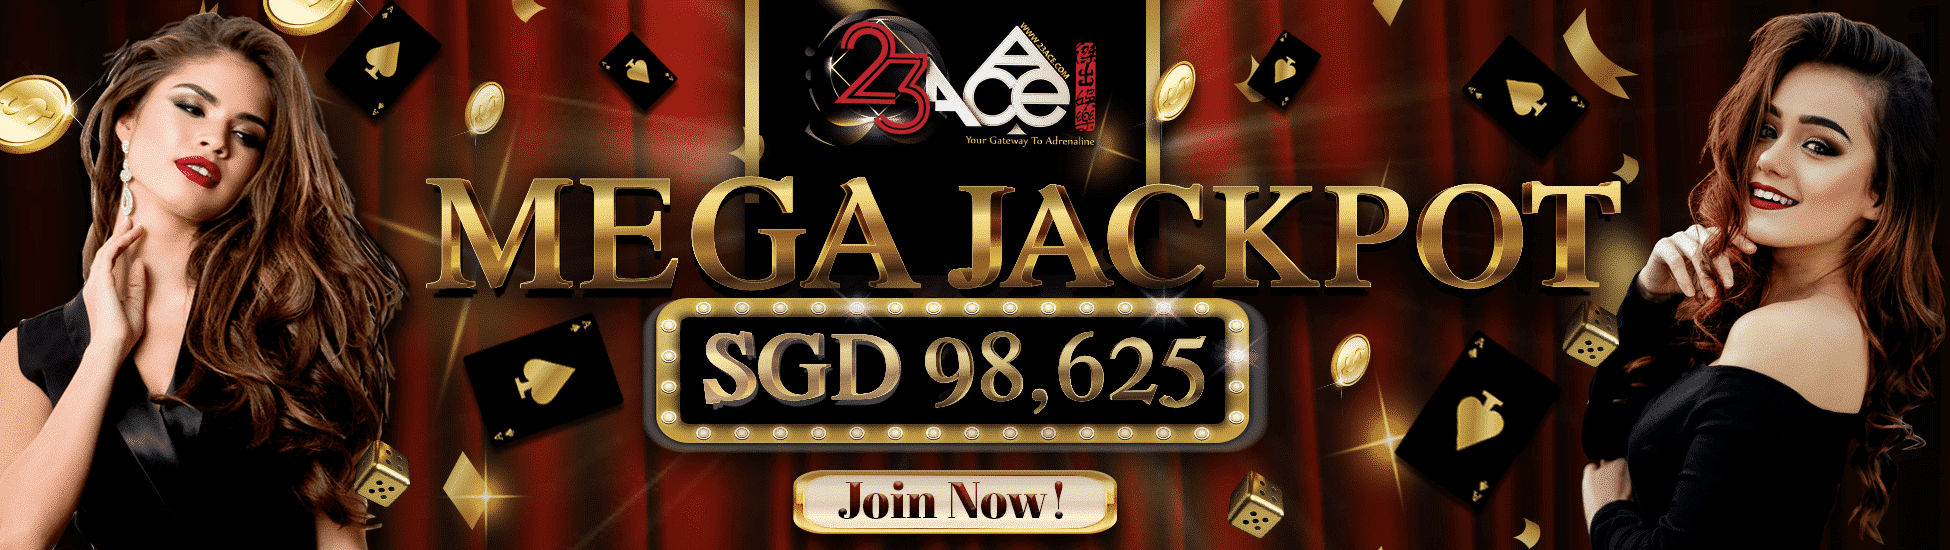 mega jackpot banner 23 ace 1 post this